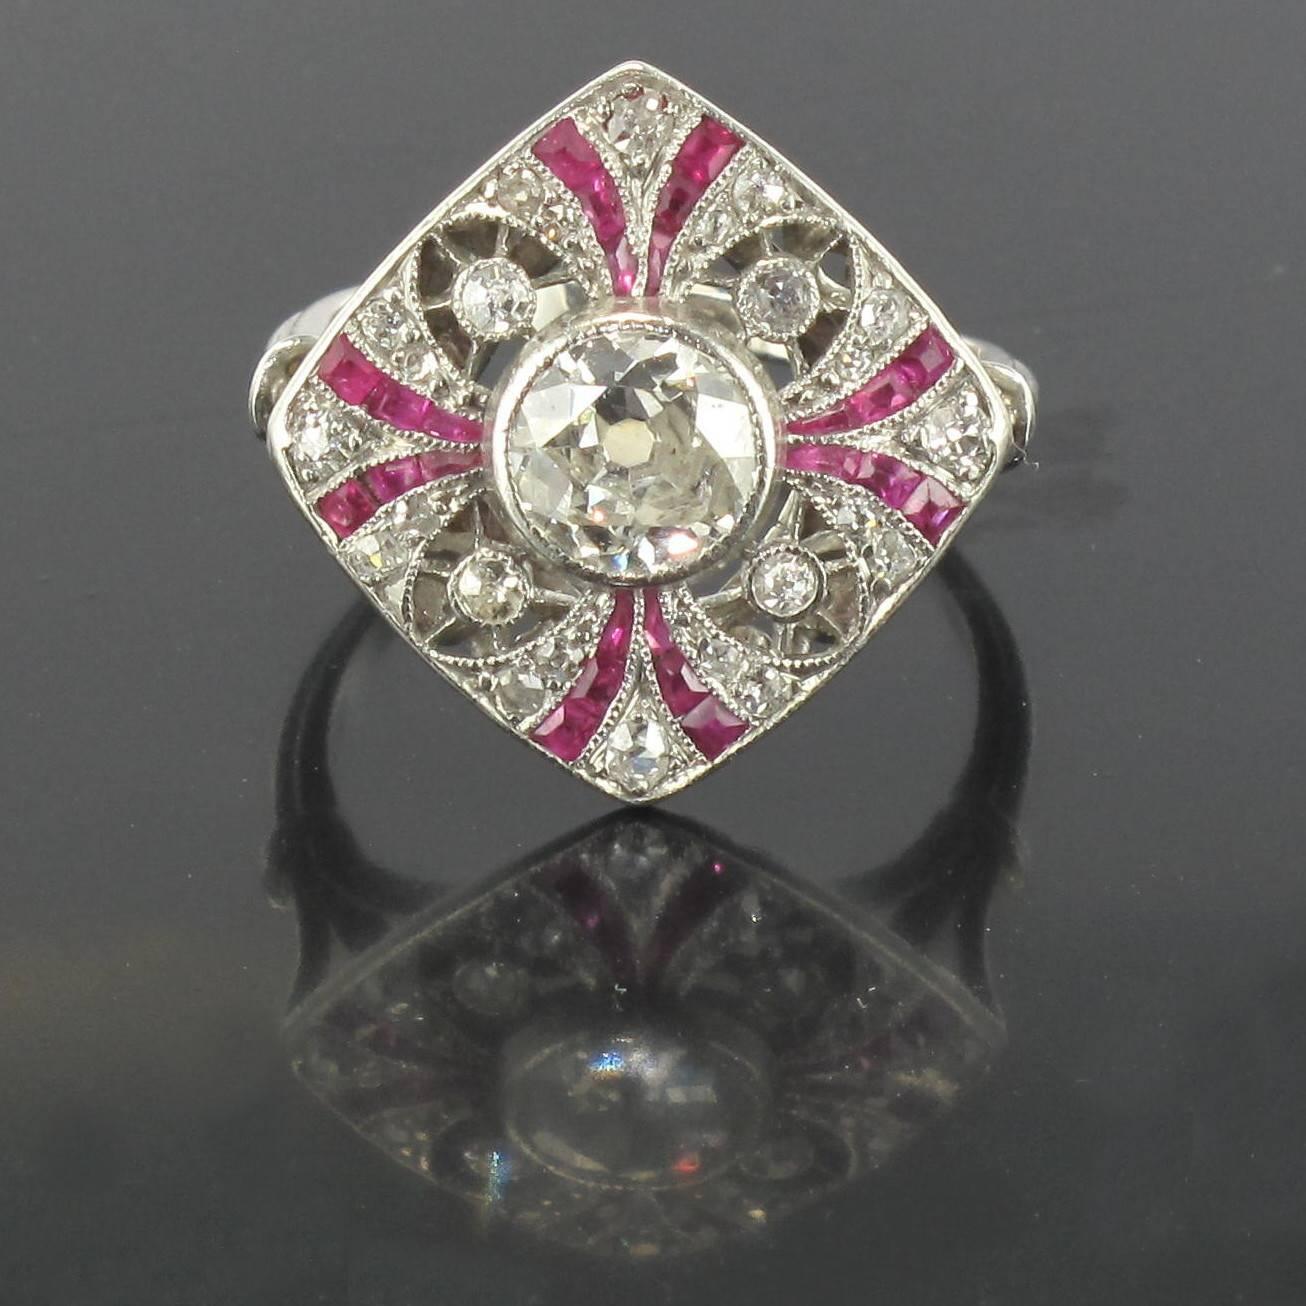 Ring in platinium. 

Splendid rhombic shaped Art Deco ring featuring a central crimped brilliant cut antique diamond. The surrounding openwork is decorated with diamonds and calibrated rubies in curved lines. The beginning of the ring band